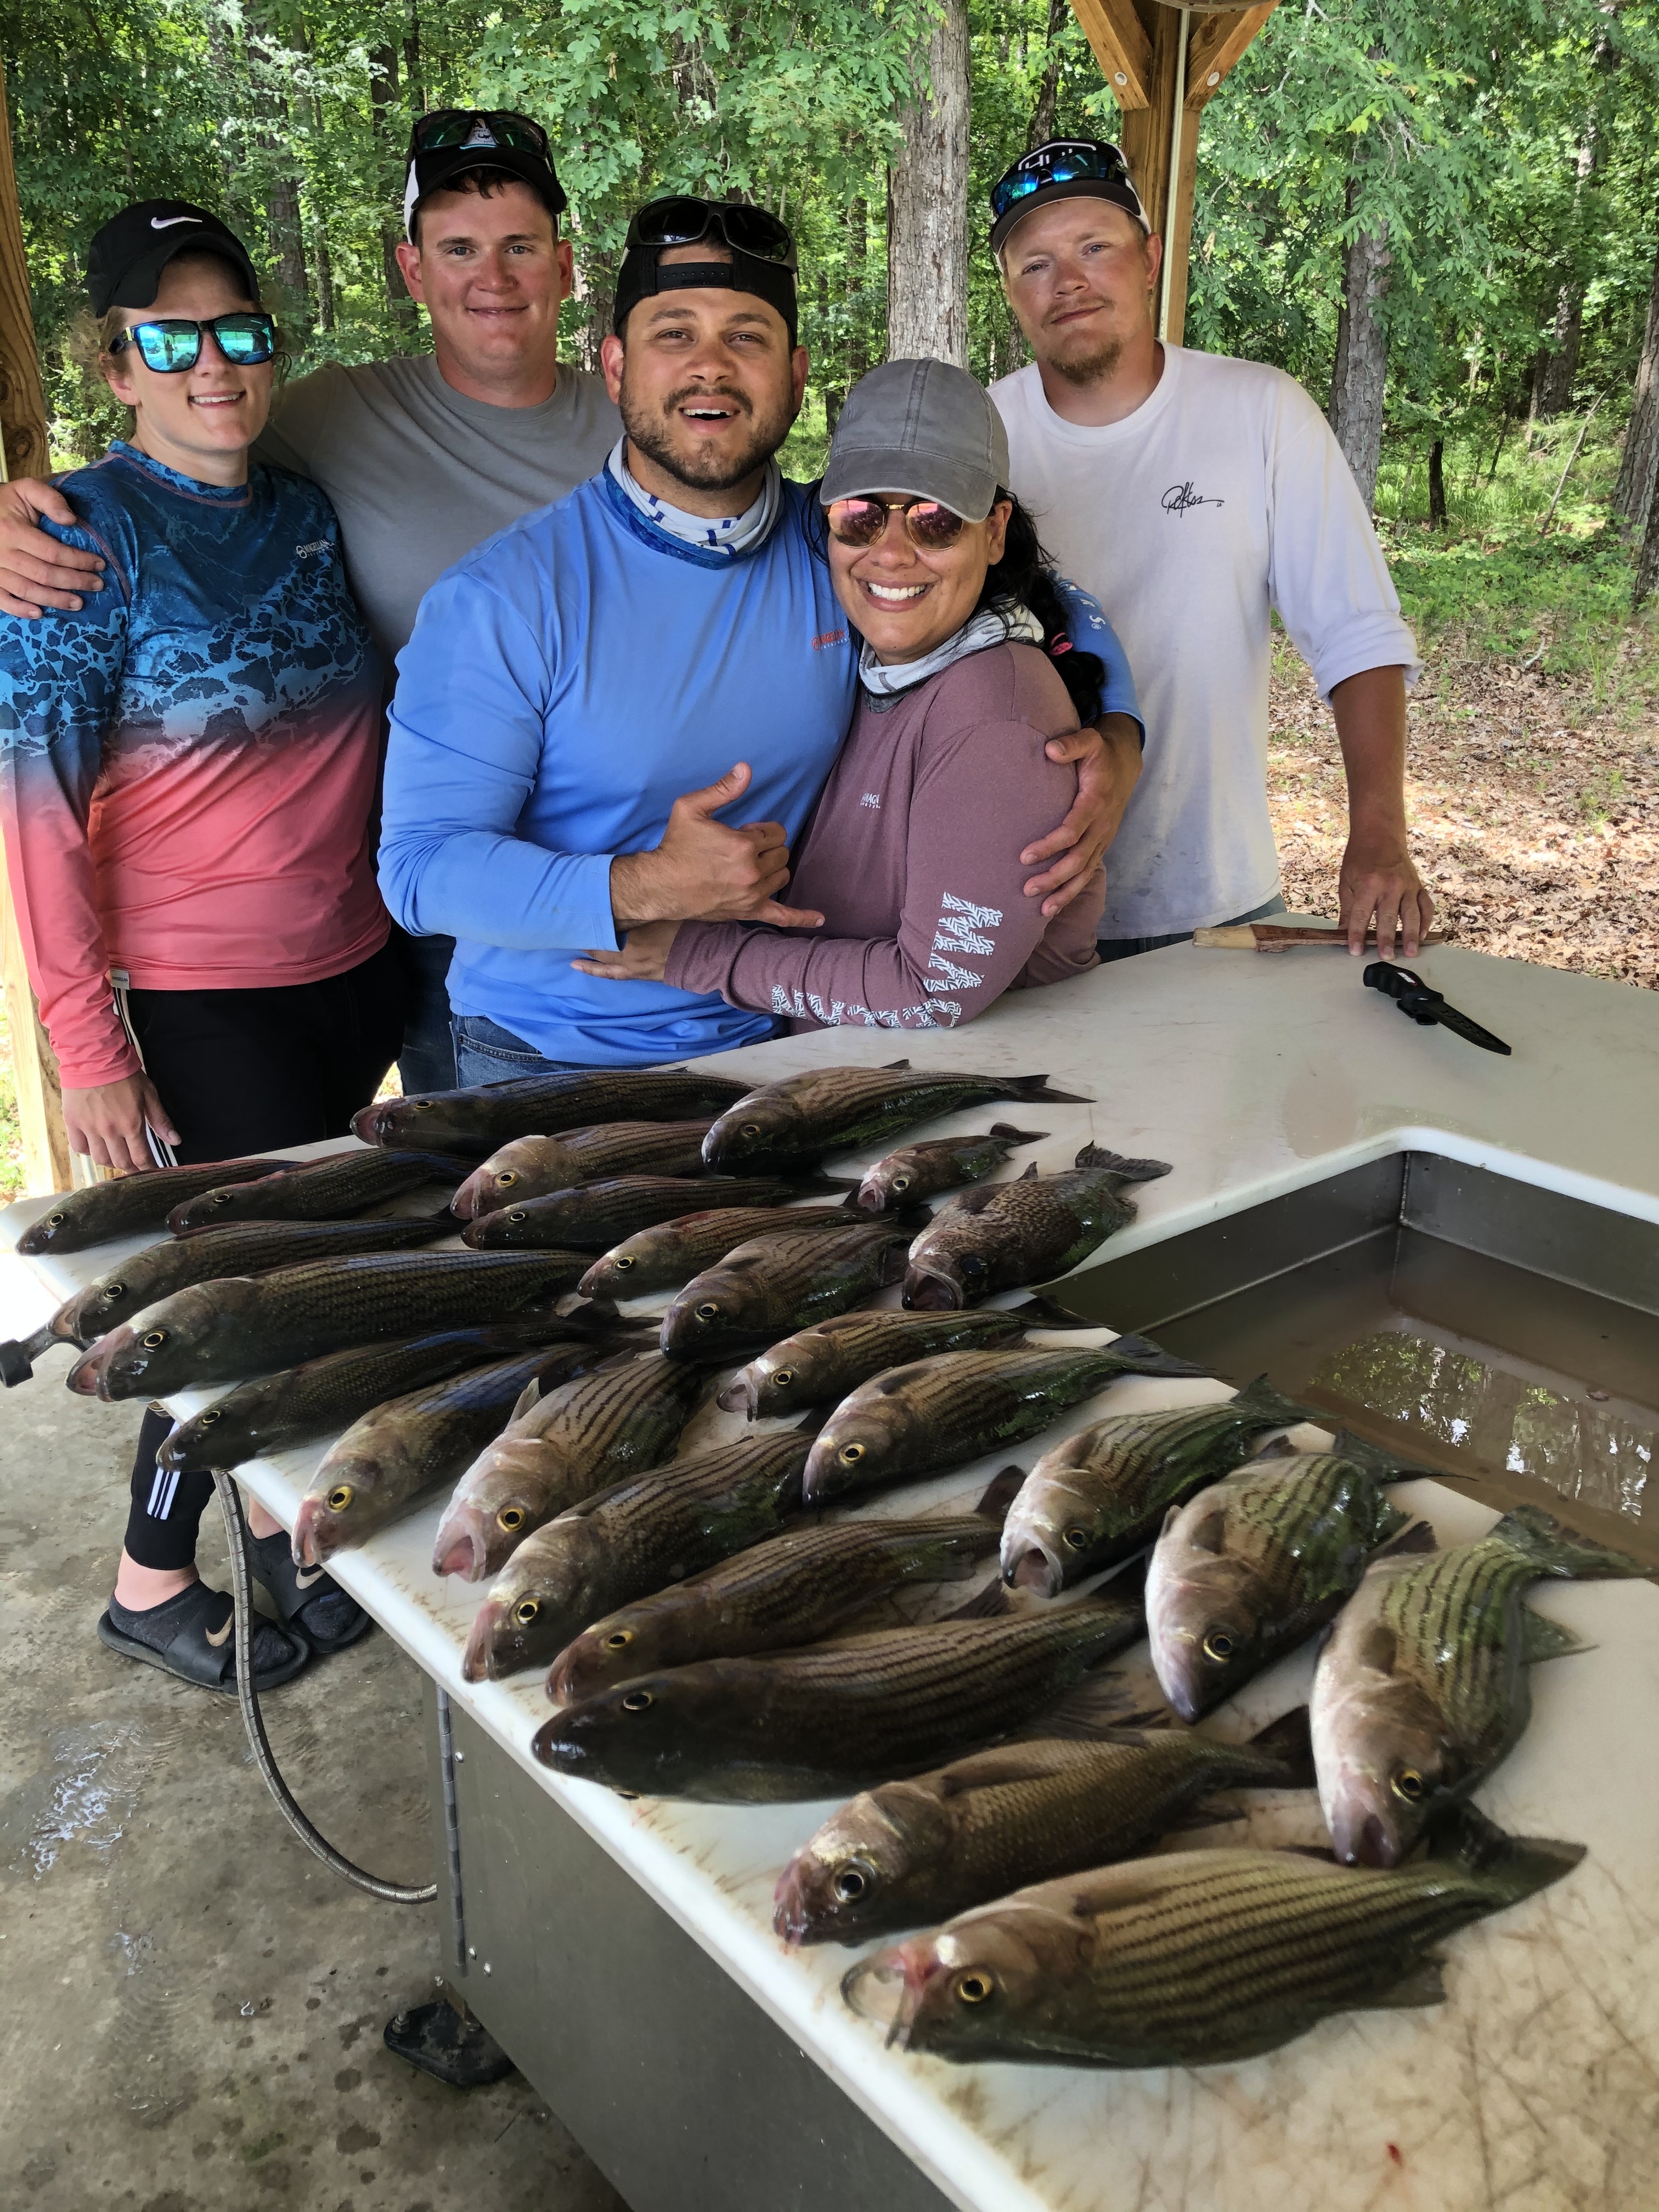 May-17-2020-Tyler-and-Megan-Mclendon-Karla-and-Eddie-Flores-Zach-Selonen-with-their-catch-of-the-day